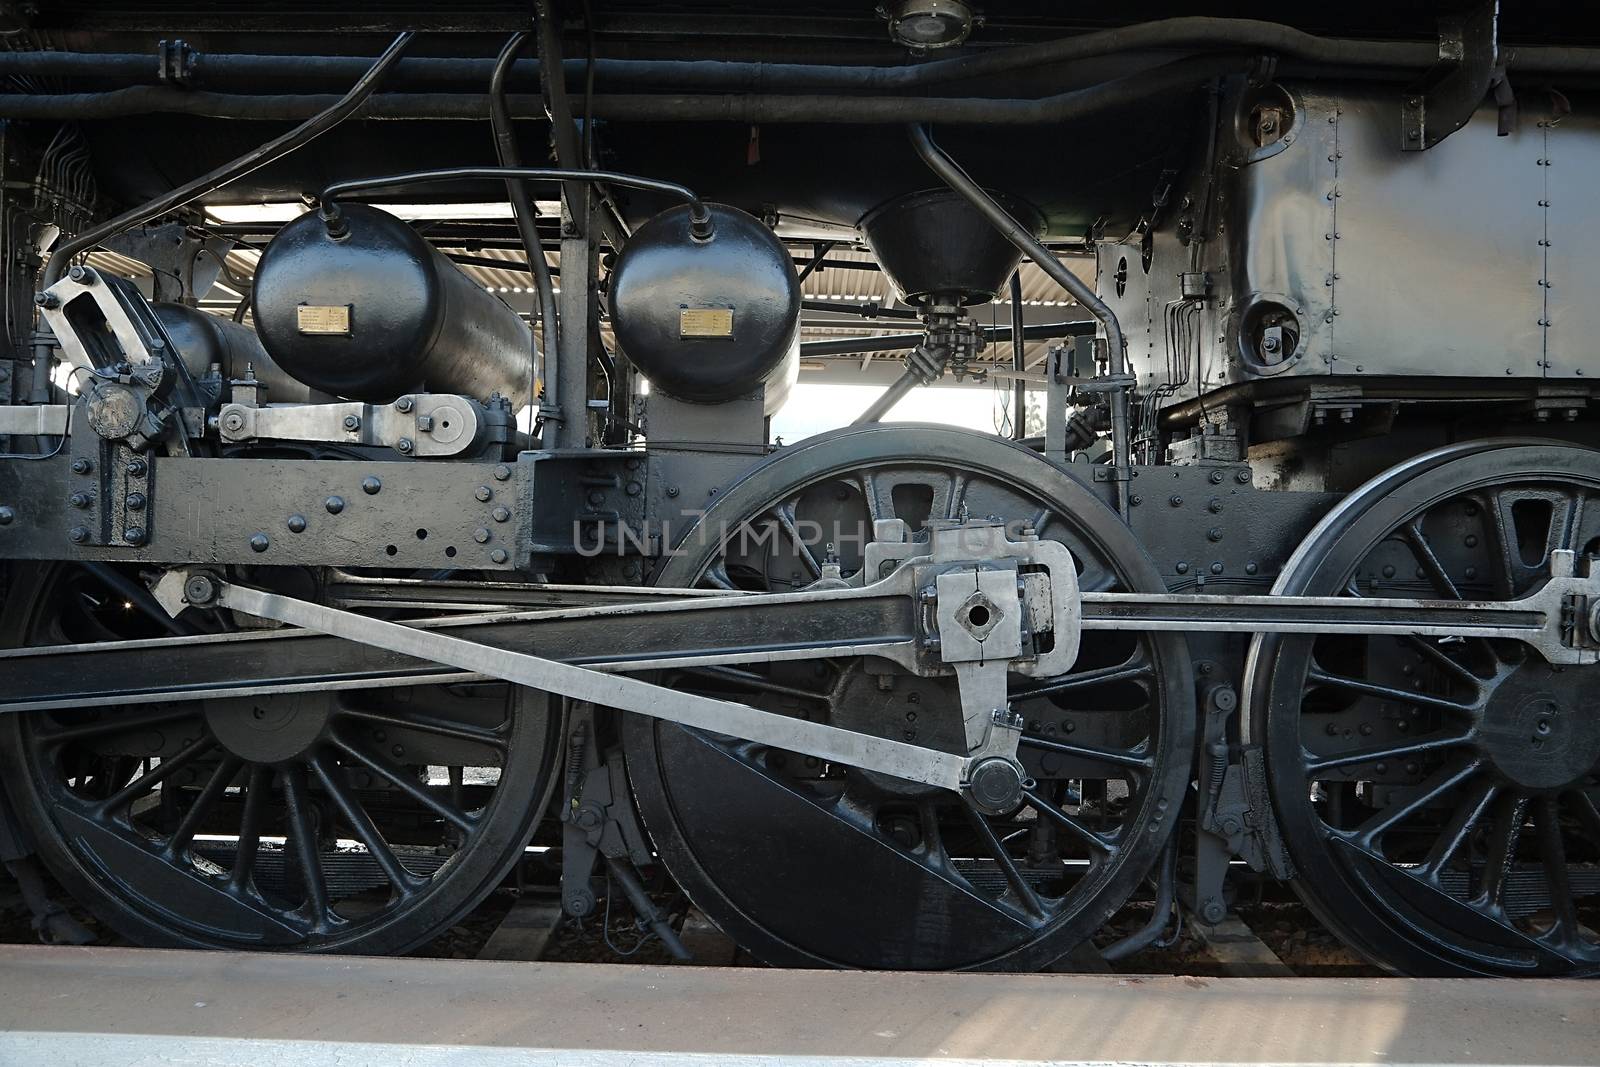 Steam locomotive rolling by close